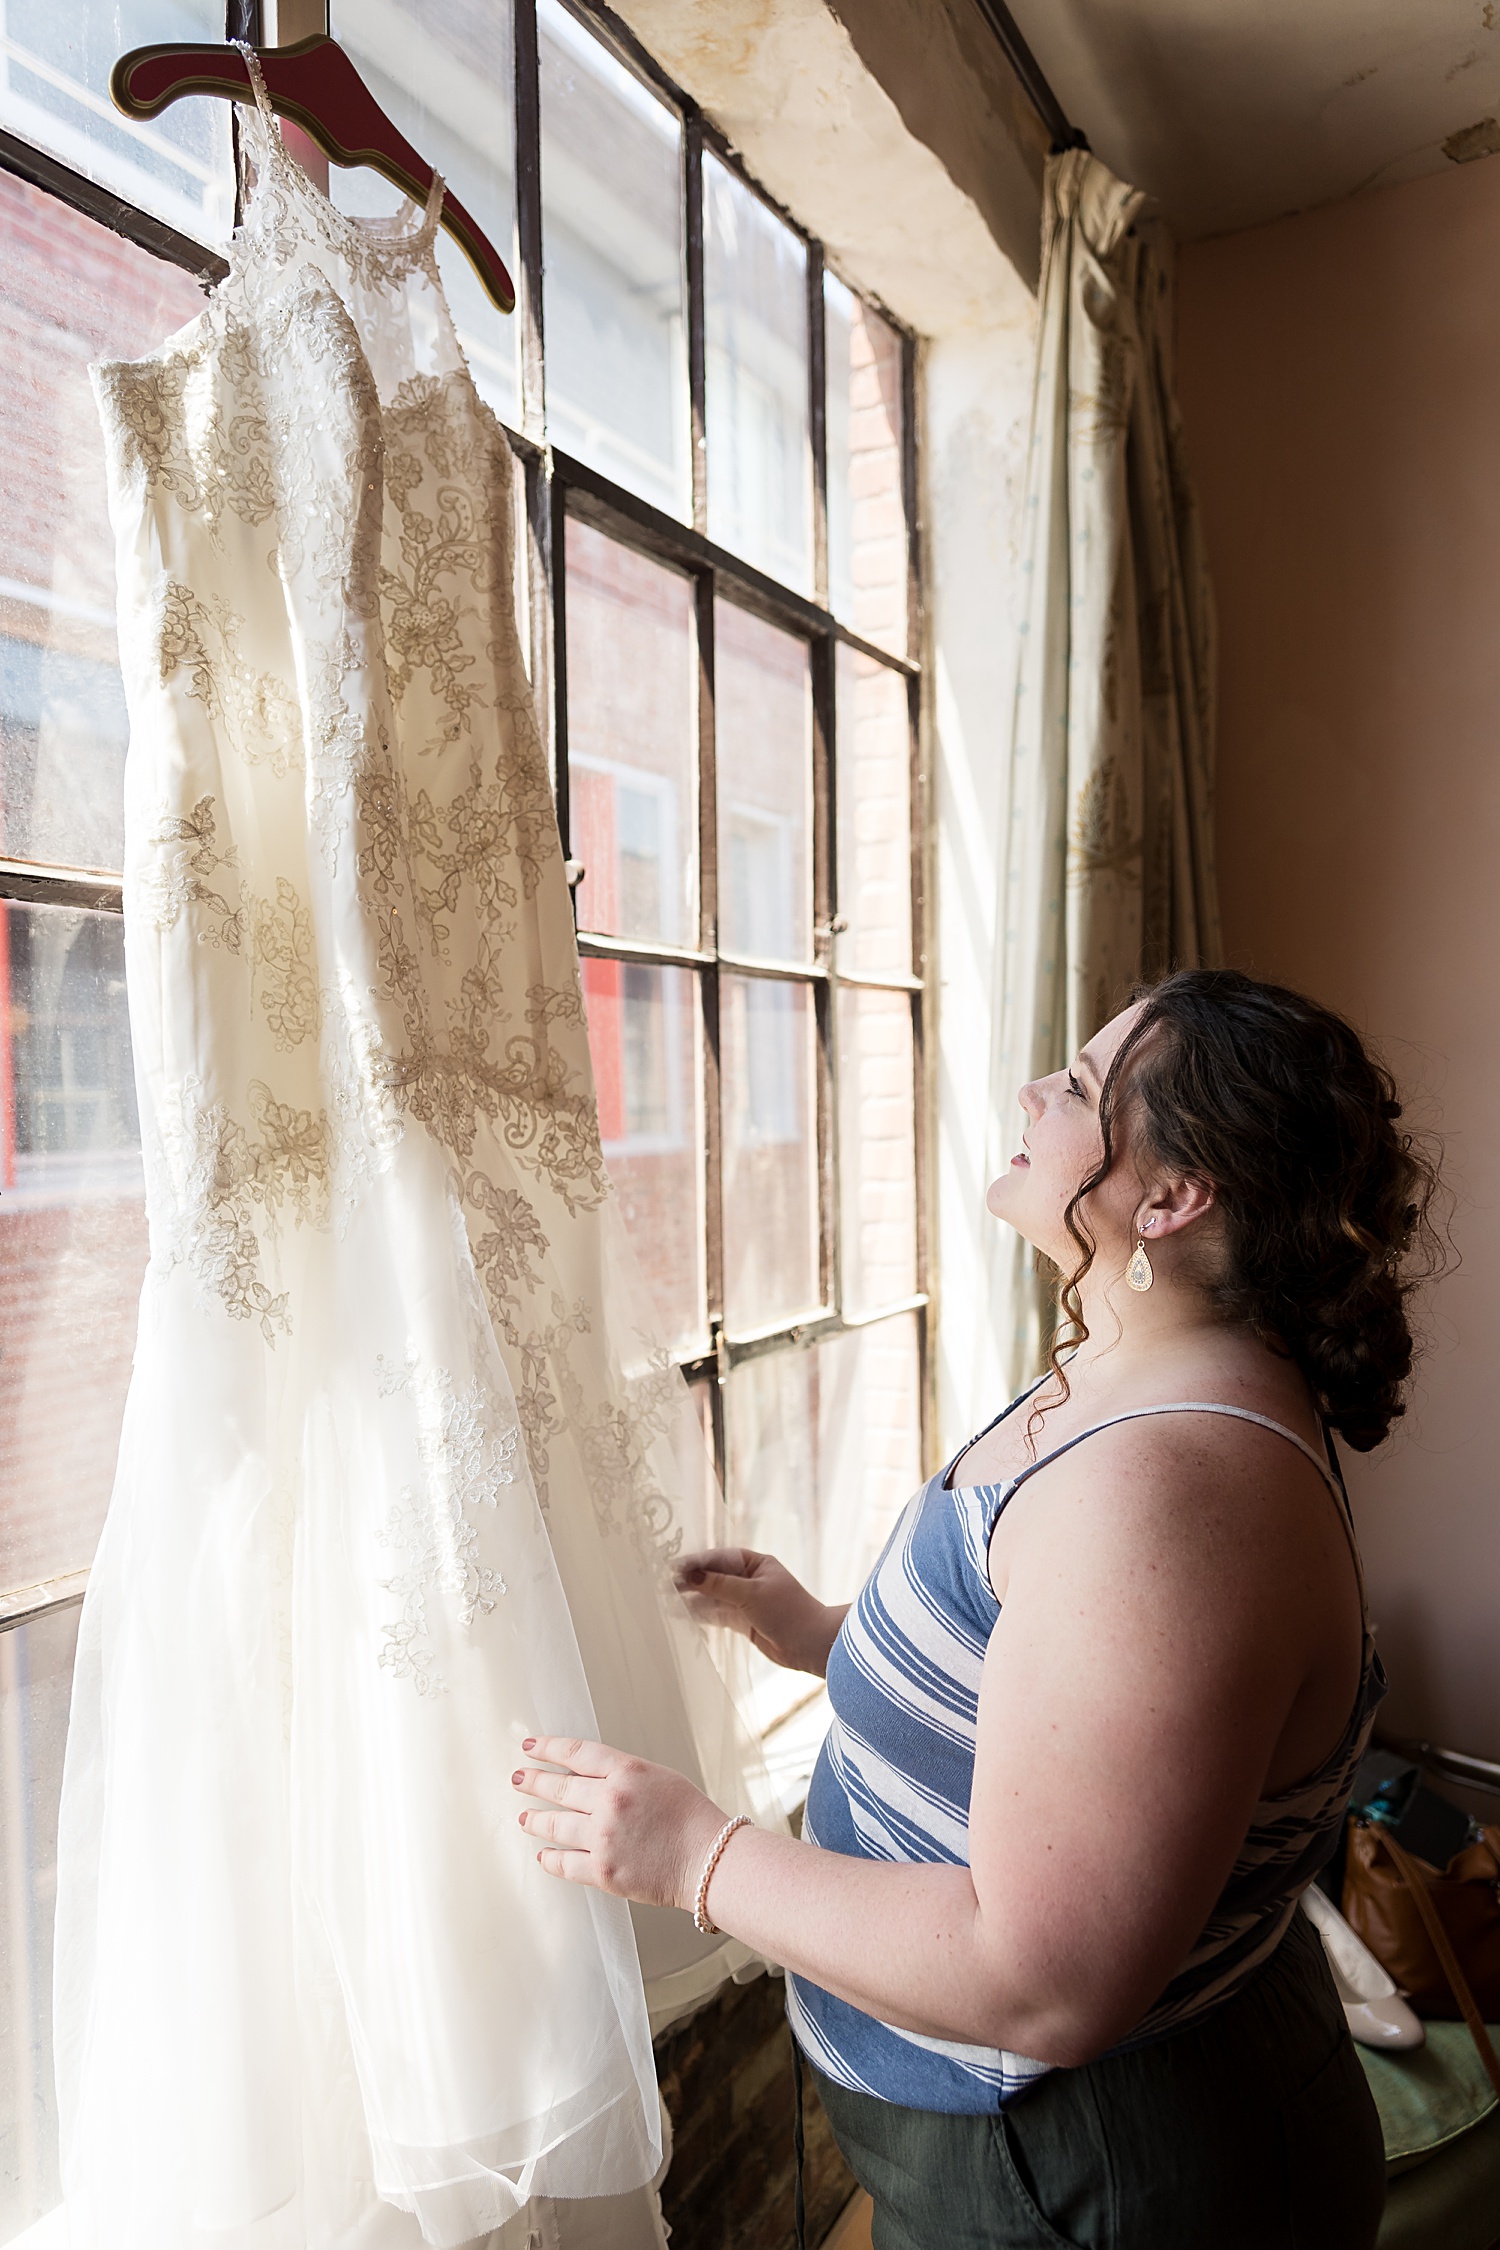 Getting-ready-The-Bride-and-Bauer-KC-Wedding-Photographer-Emily-Lynn-Photography